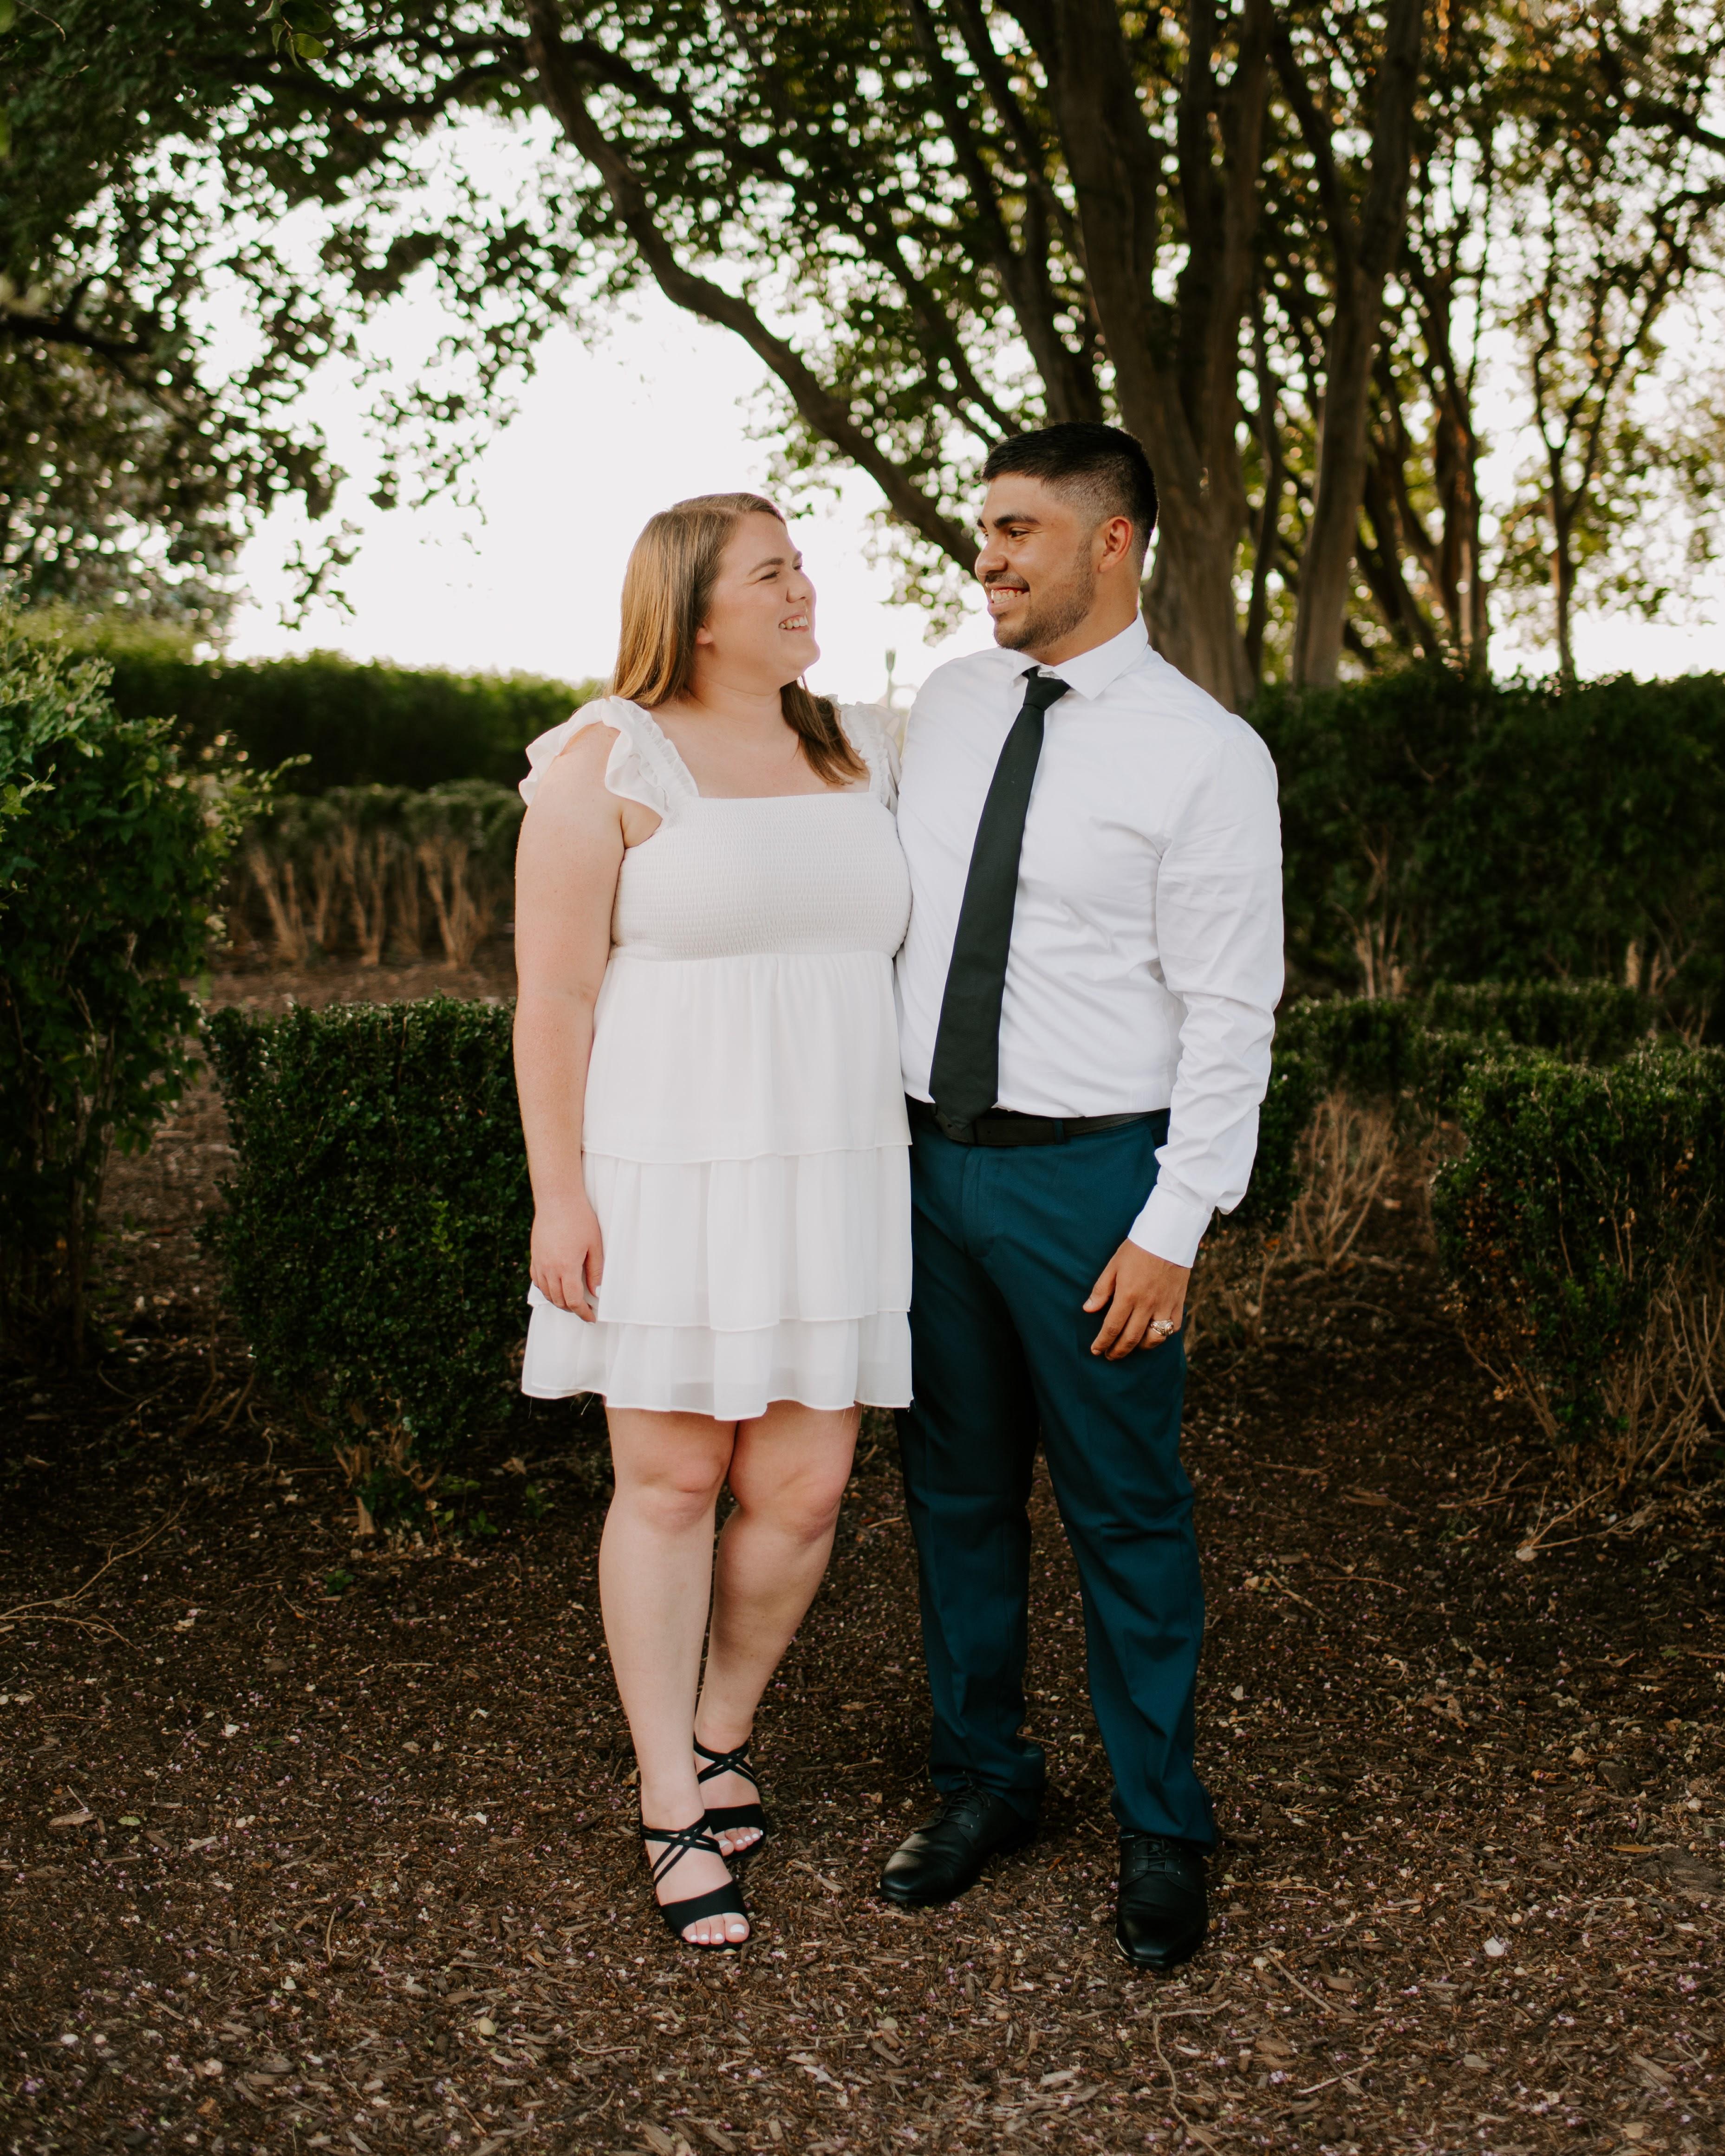 The Wedding Website of Haleigh Conklin and Adrian Rosas